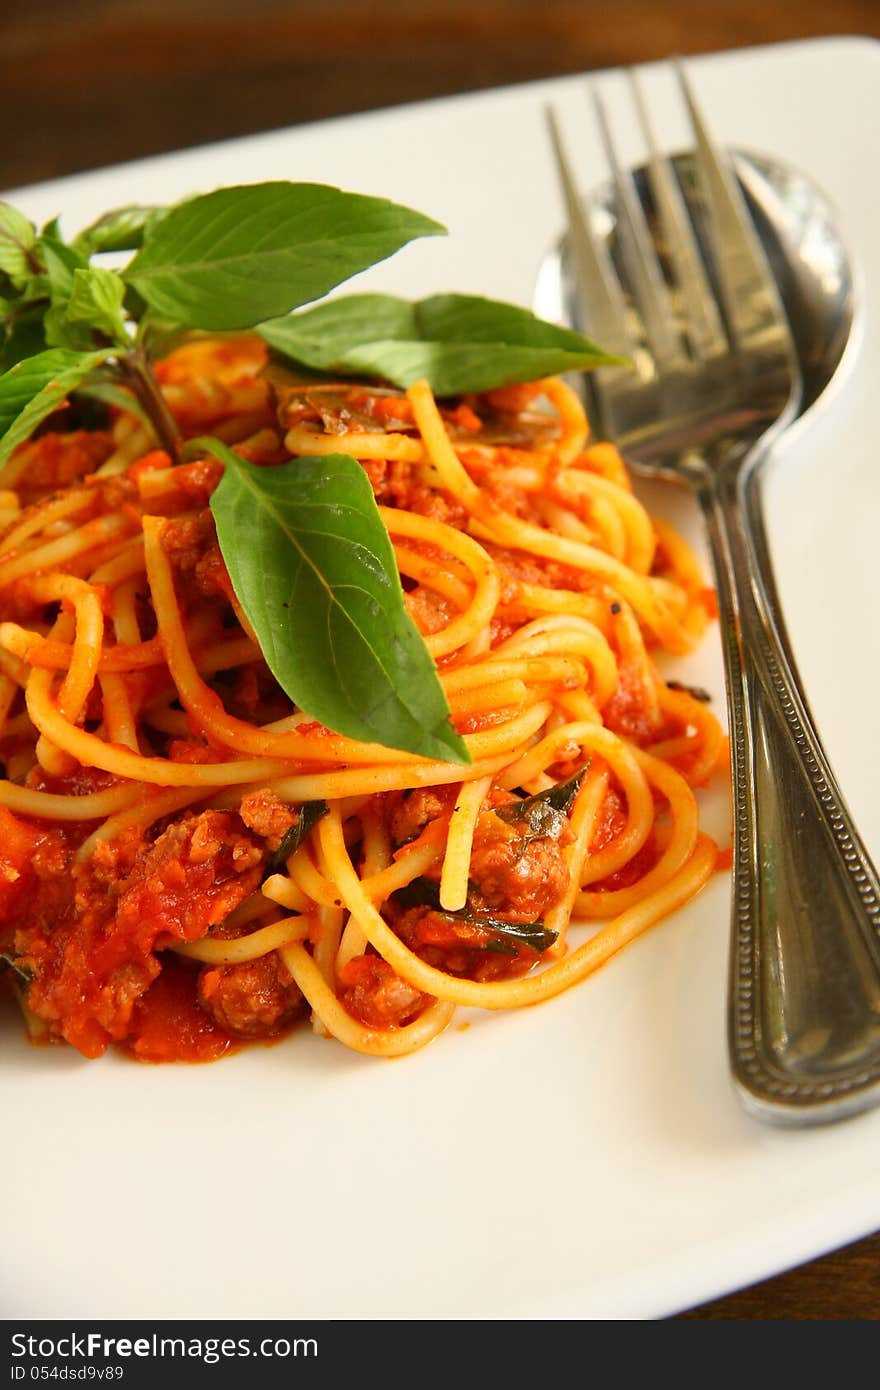 Spaghetti with Thai style sauce and fresh basil on top.